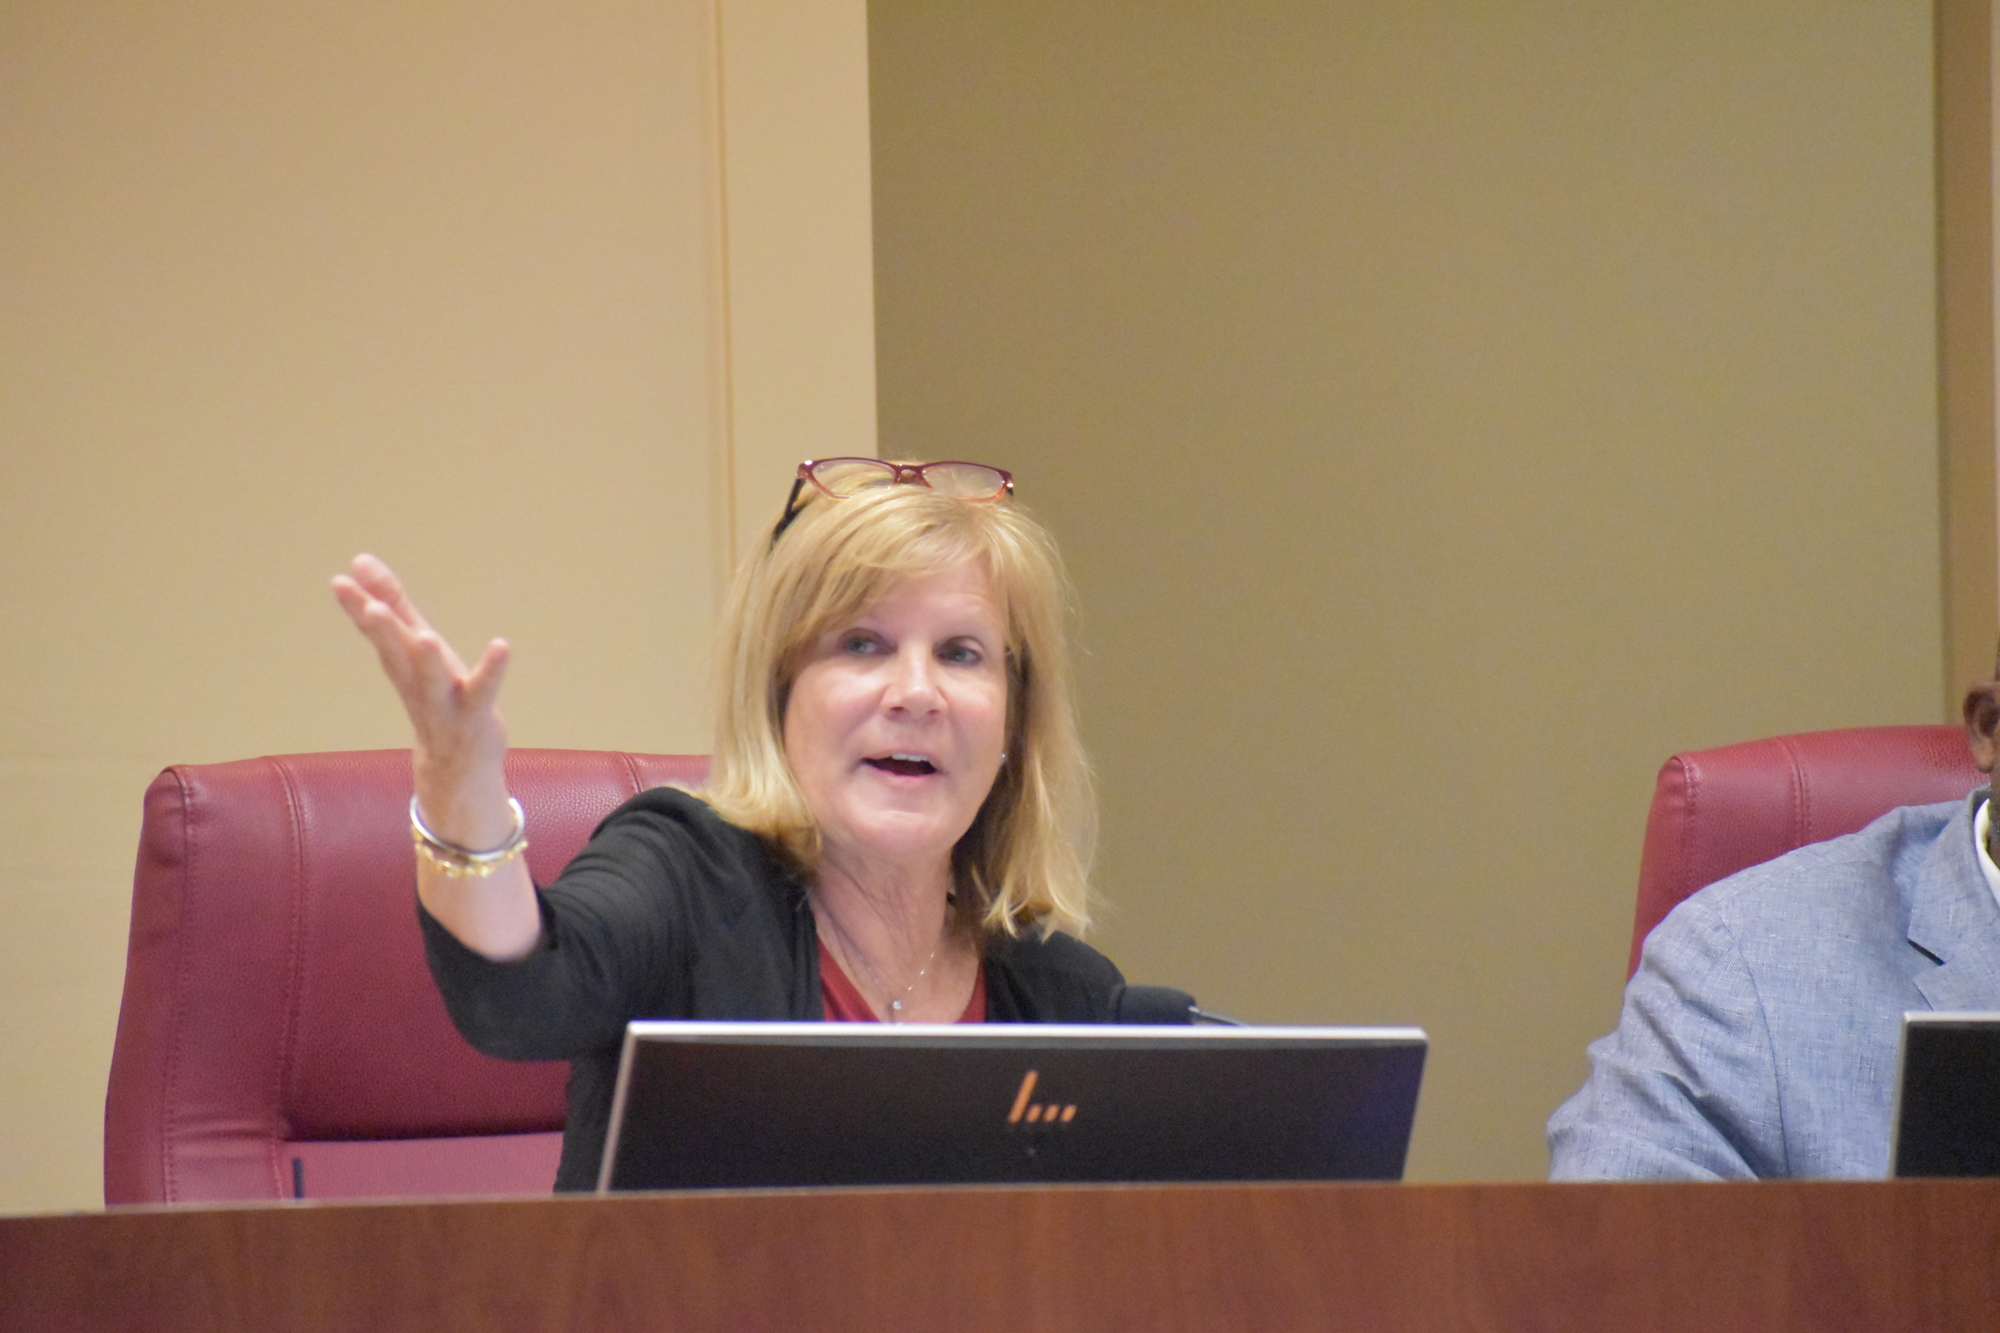 At-large Commissioner Carol Whitmore expressed support for the motion to research allowing county employees to carry weapons at work but said she did not support the timing on the agenda item.